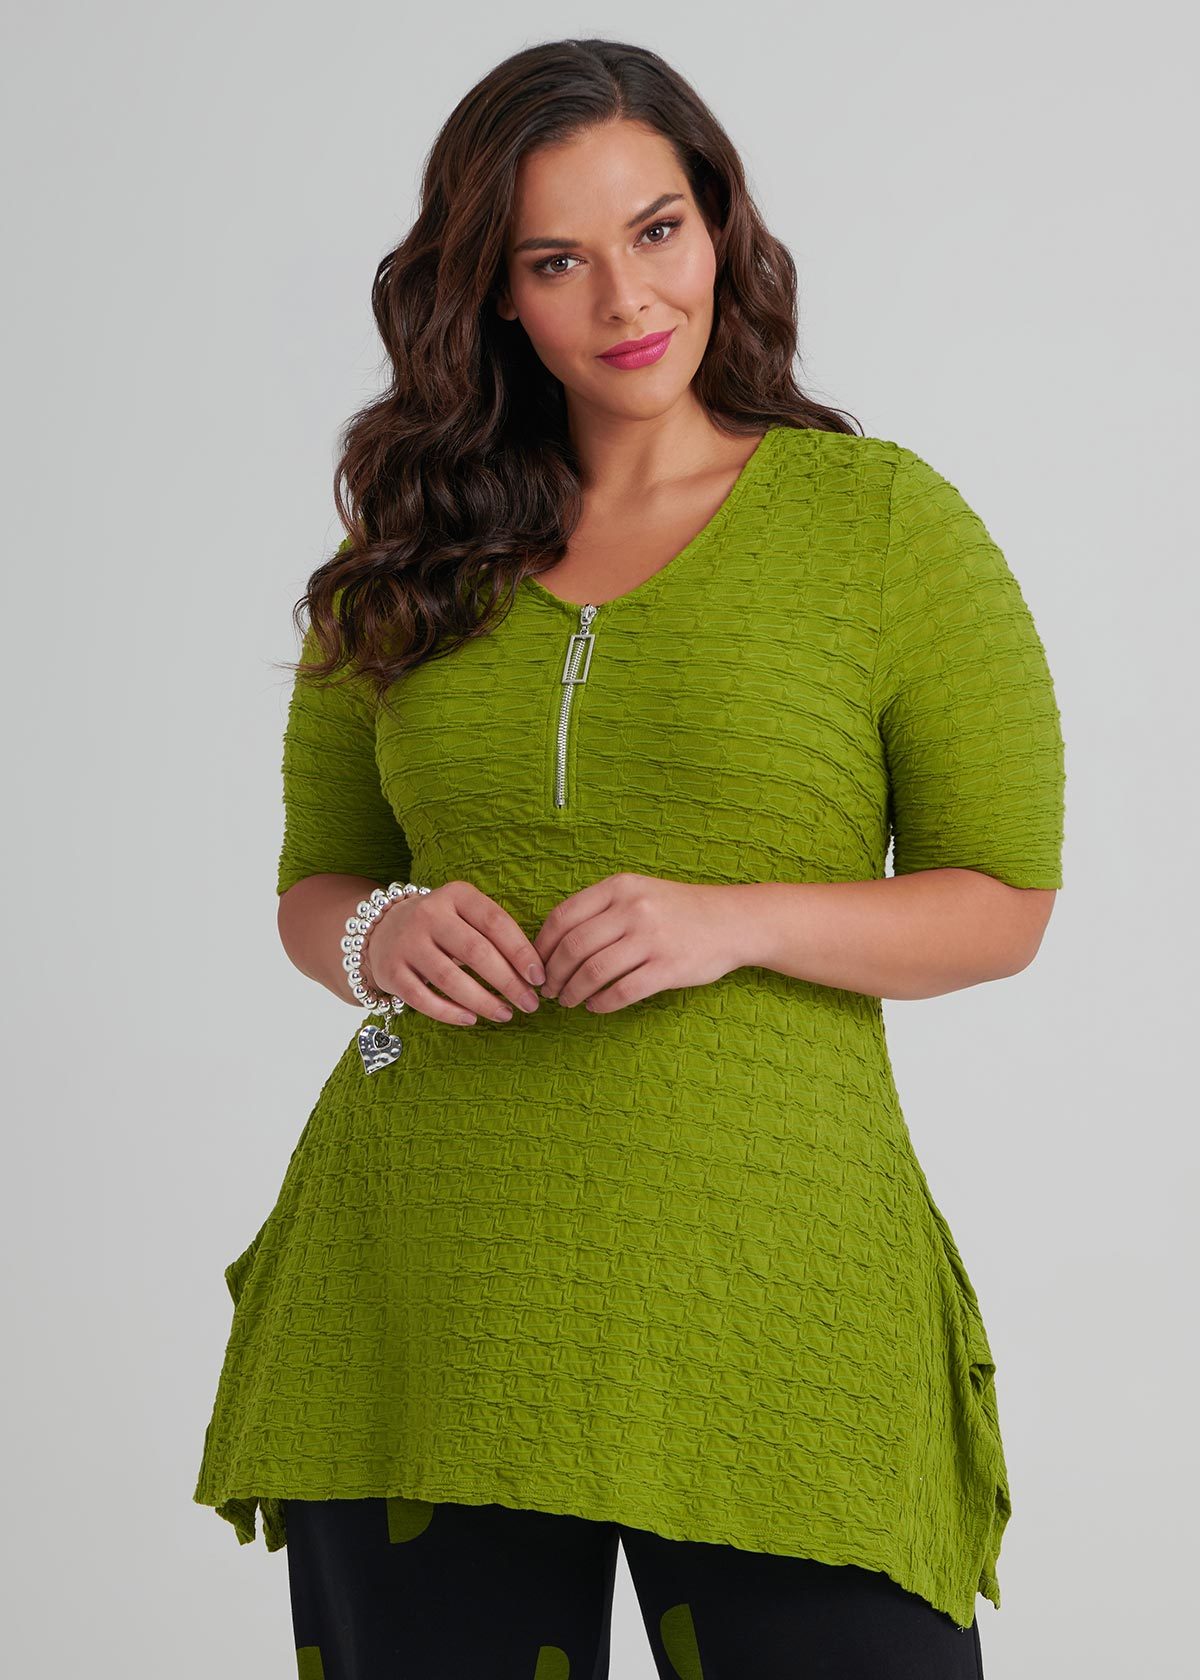 Shop Famous Textured Top in Green, Sizes 12-30 | Taking Shape AU